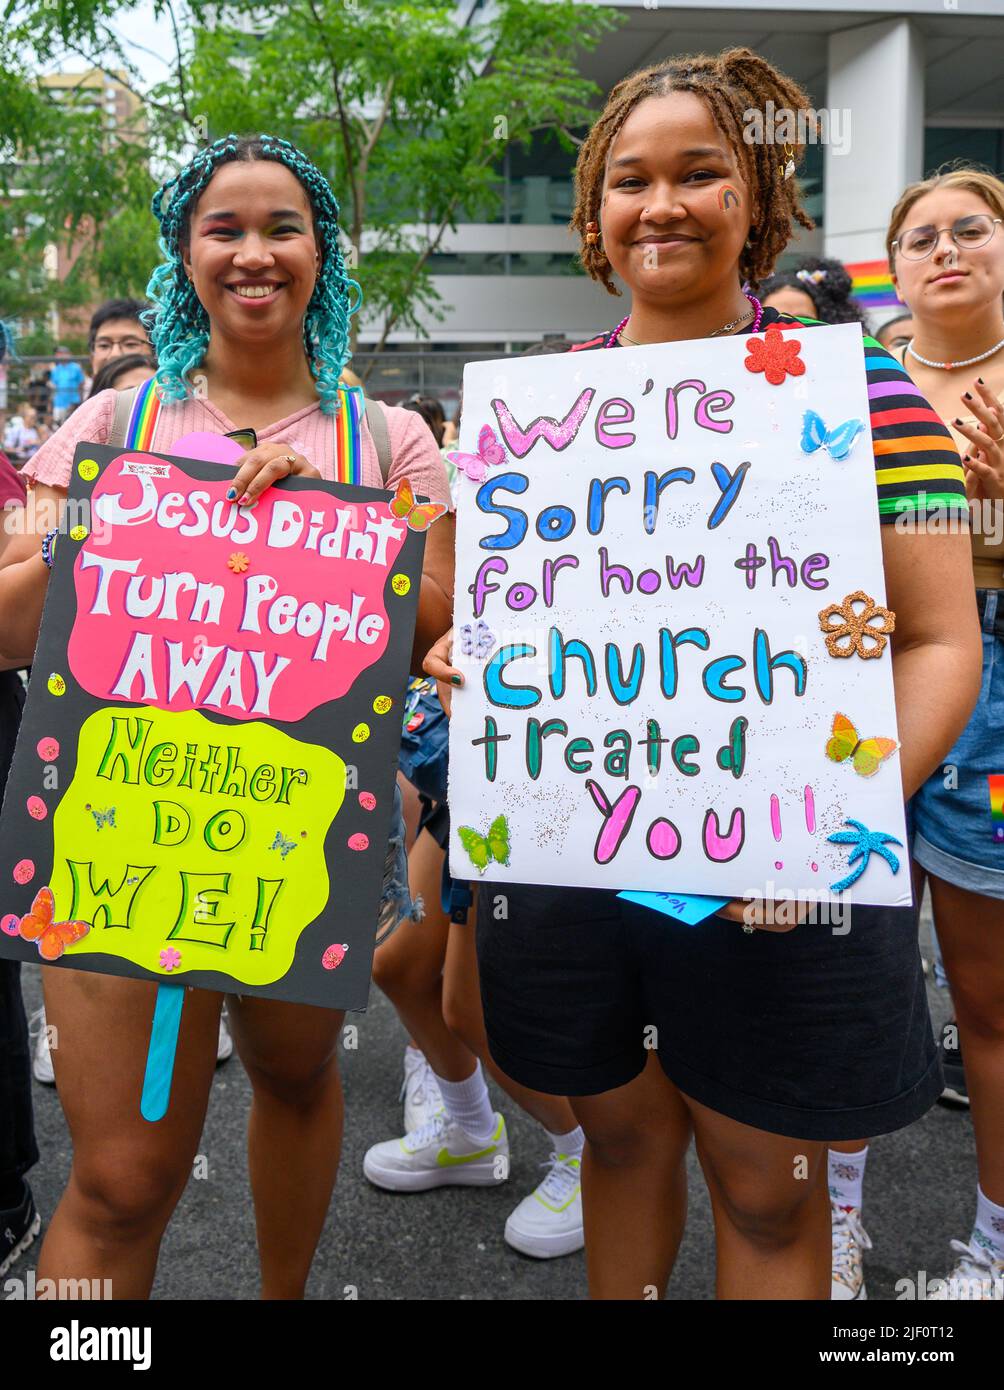 Two Christian women holding signs in support of the LGBTQ+  community during the Pride Parade Stock Photo